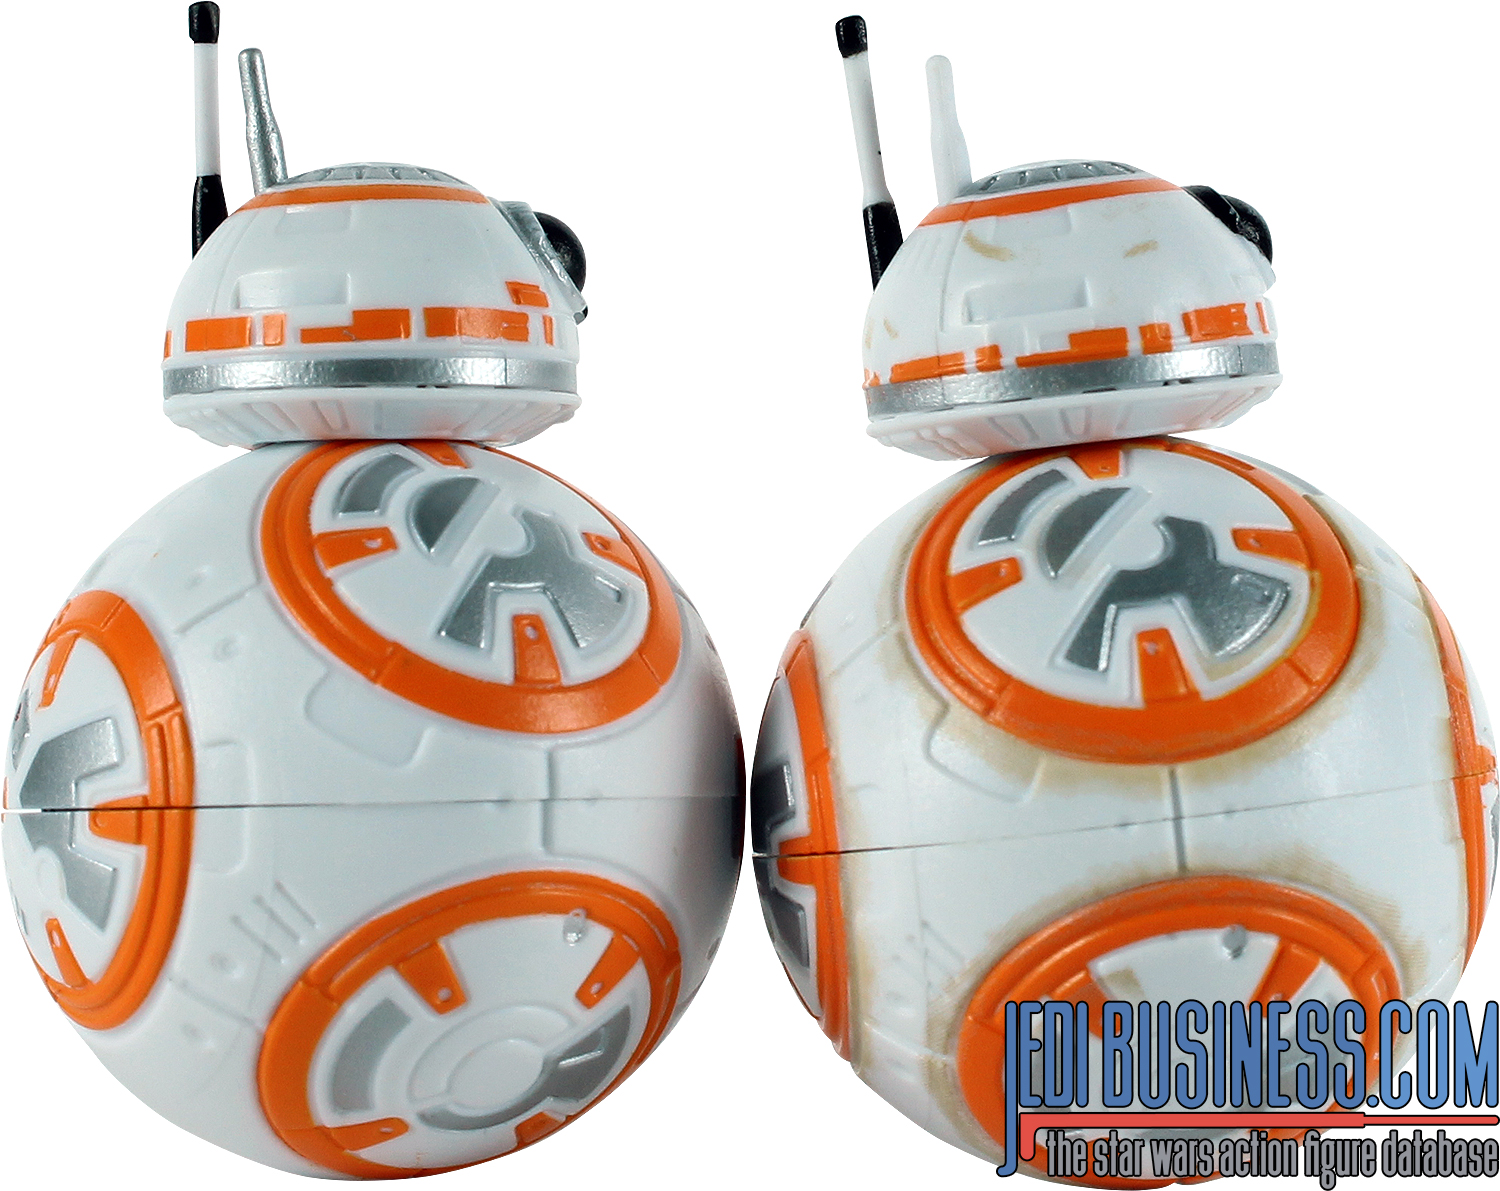 BB-8 2017 Droid Factory 4-Pack The Last Jedi